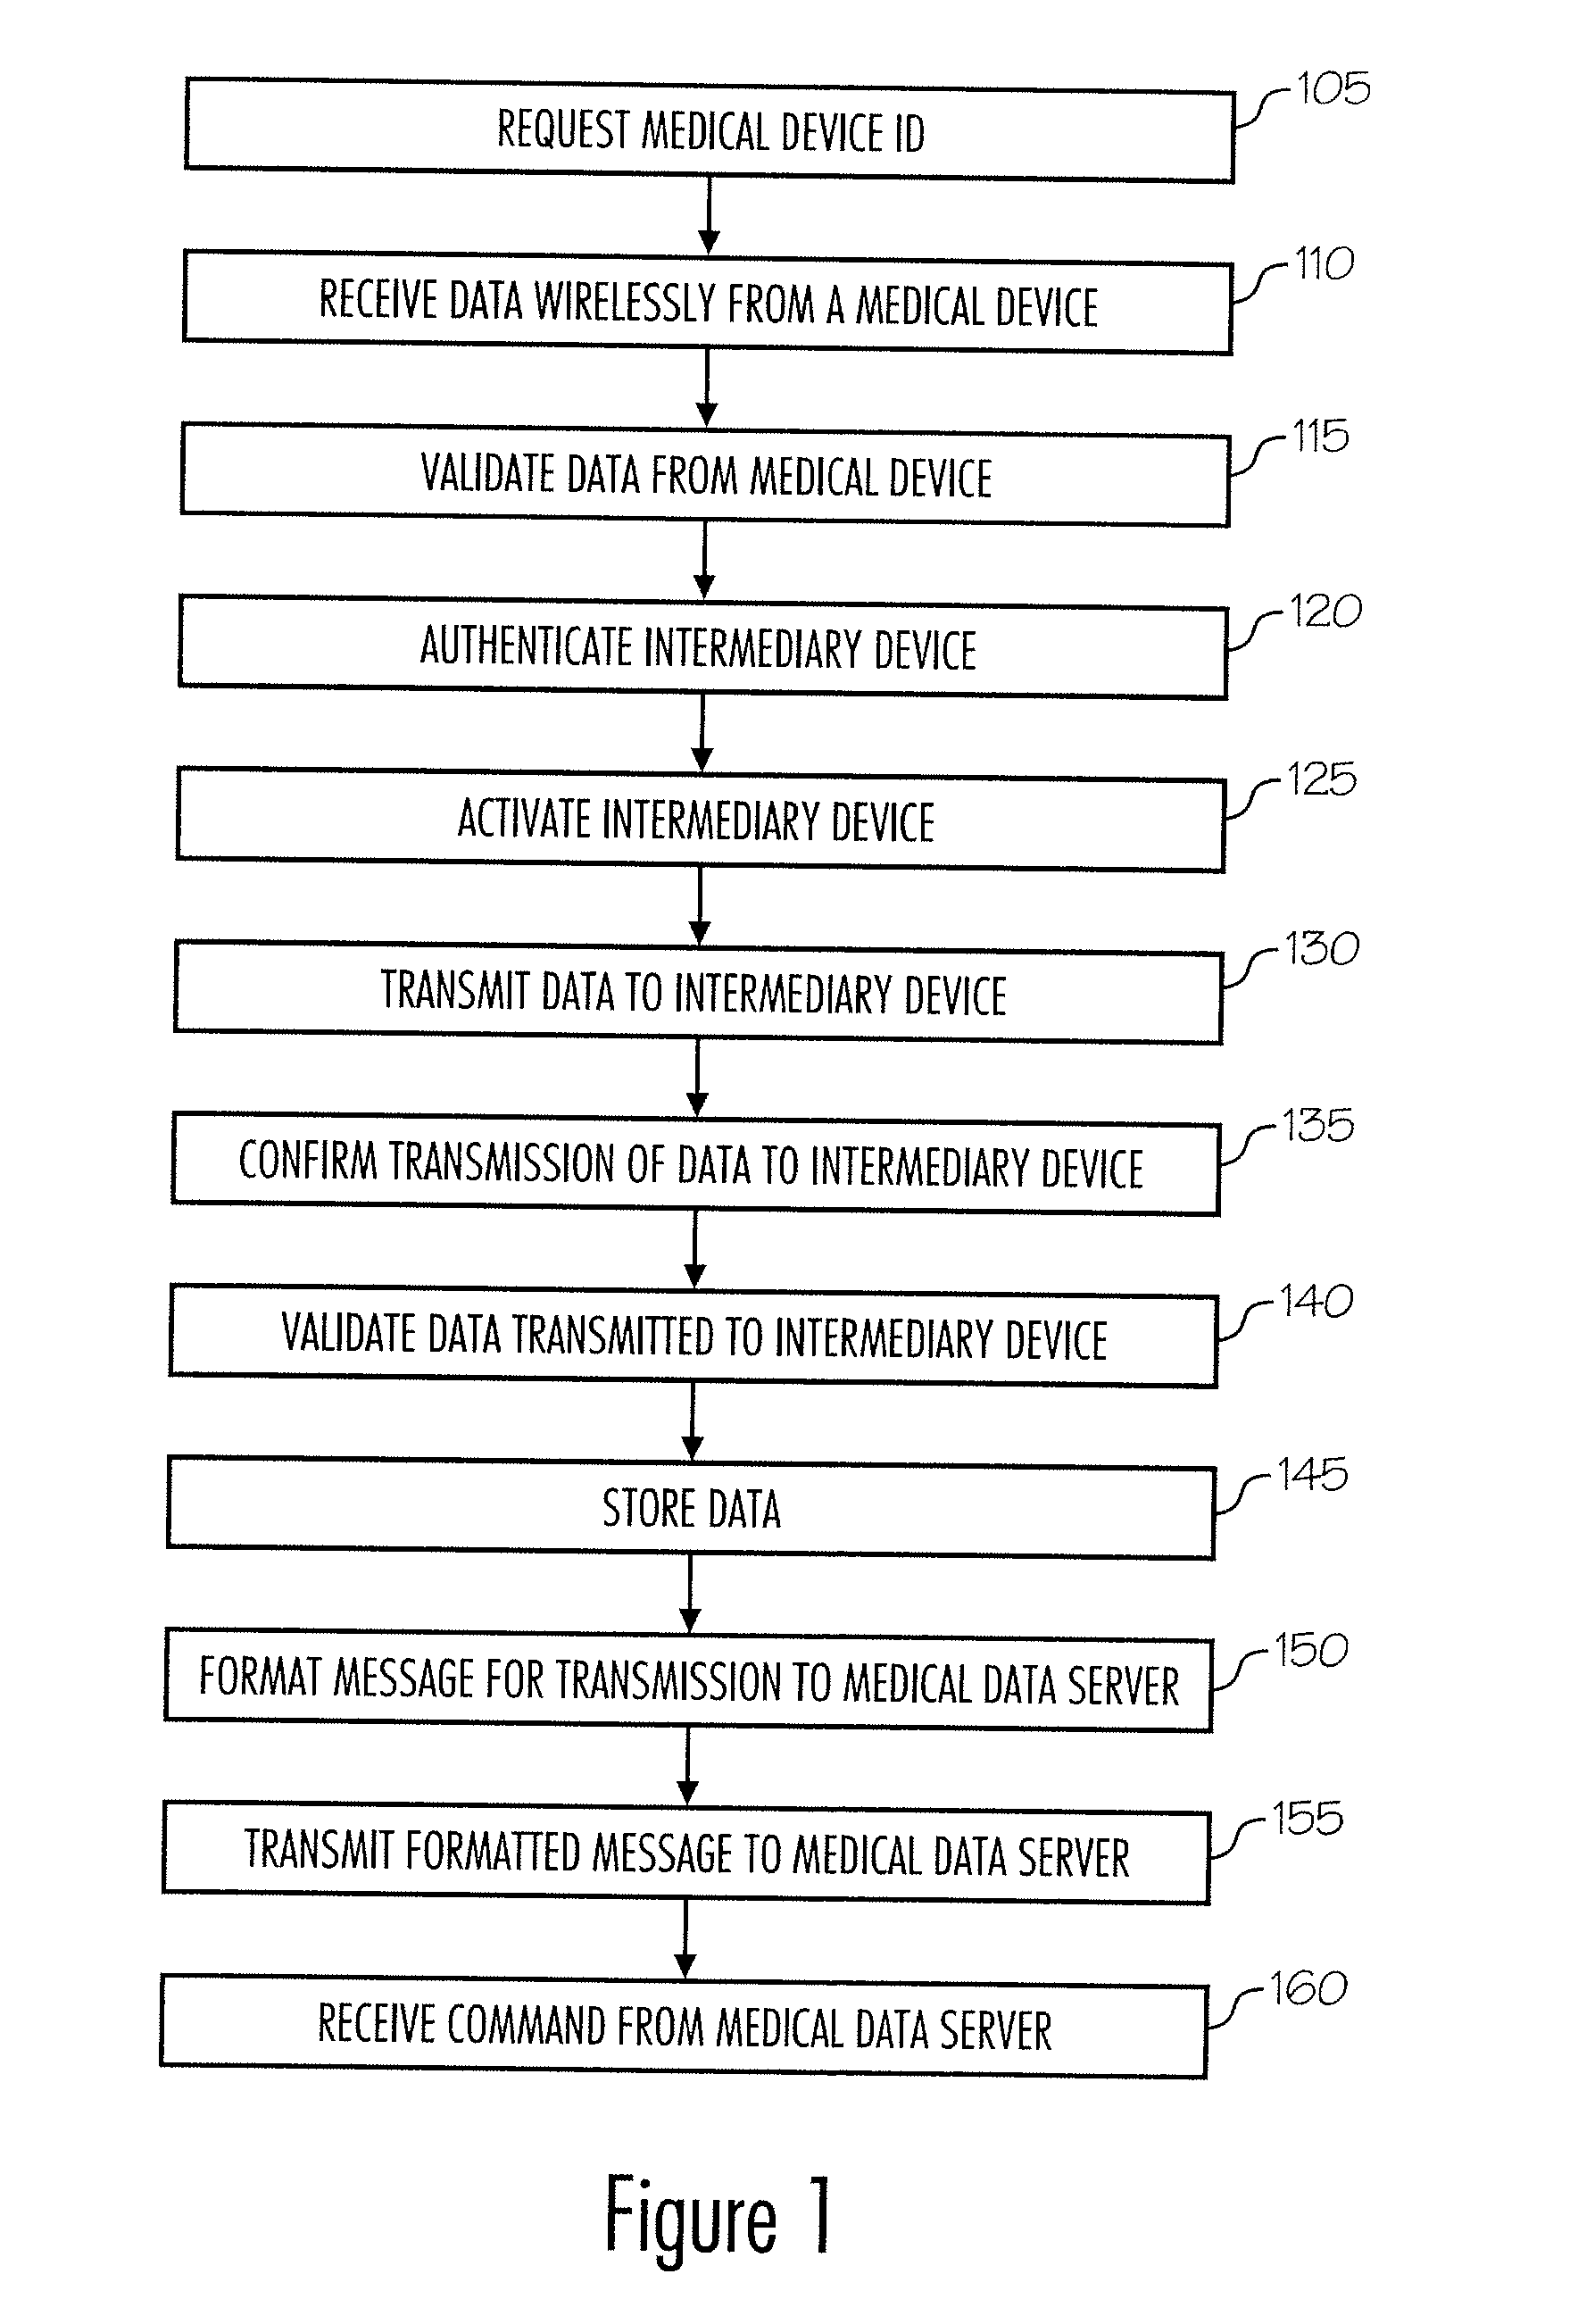 Systems and methods for wireless processing and transmittal of medical data through multiple interfaces